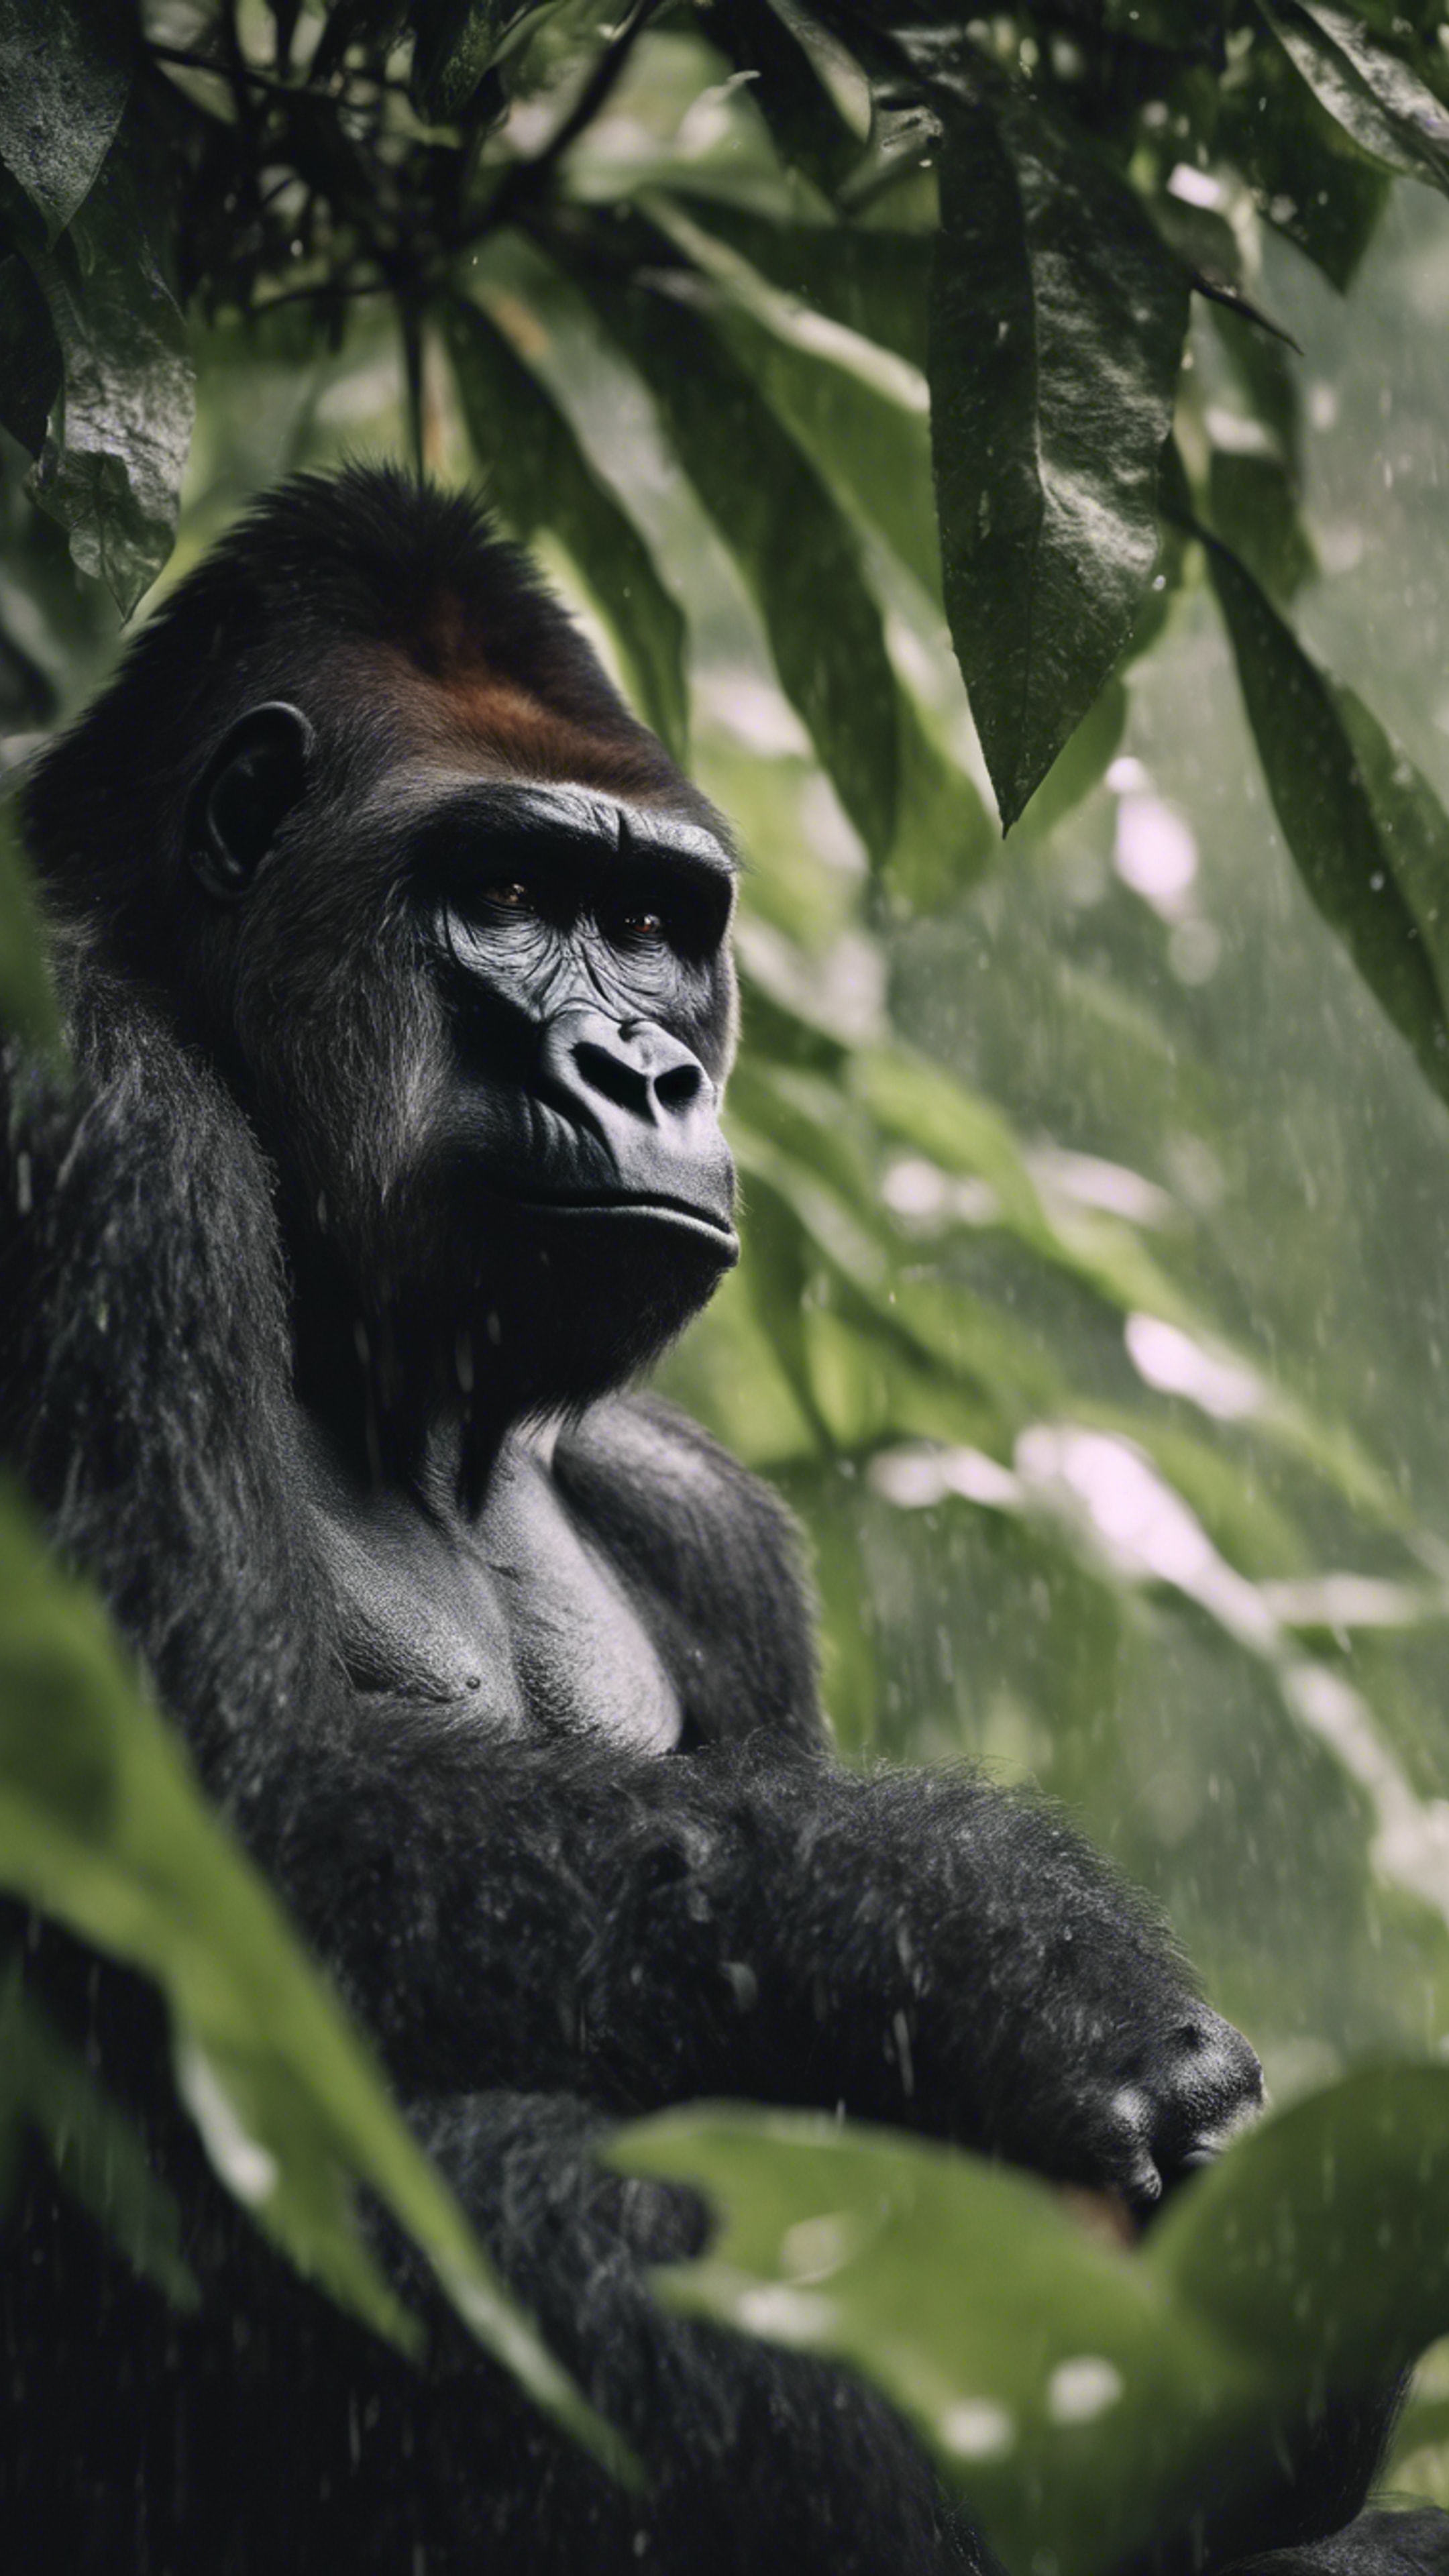 A sad gorilla on a rainy day, gazing out from under the shelter of giant leaves. Tapet[ce7c66a51f504b8e8f6d]